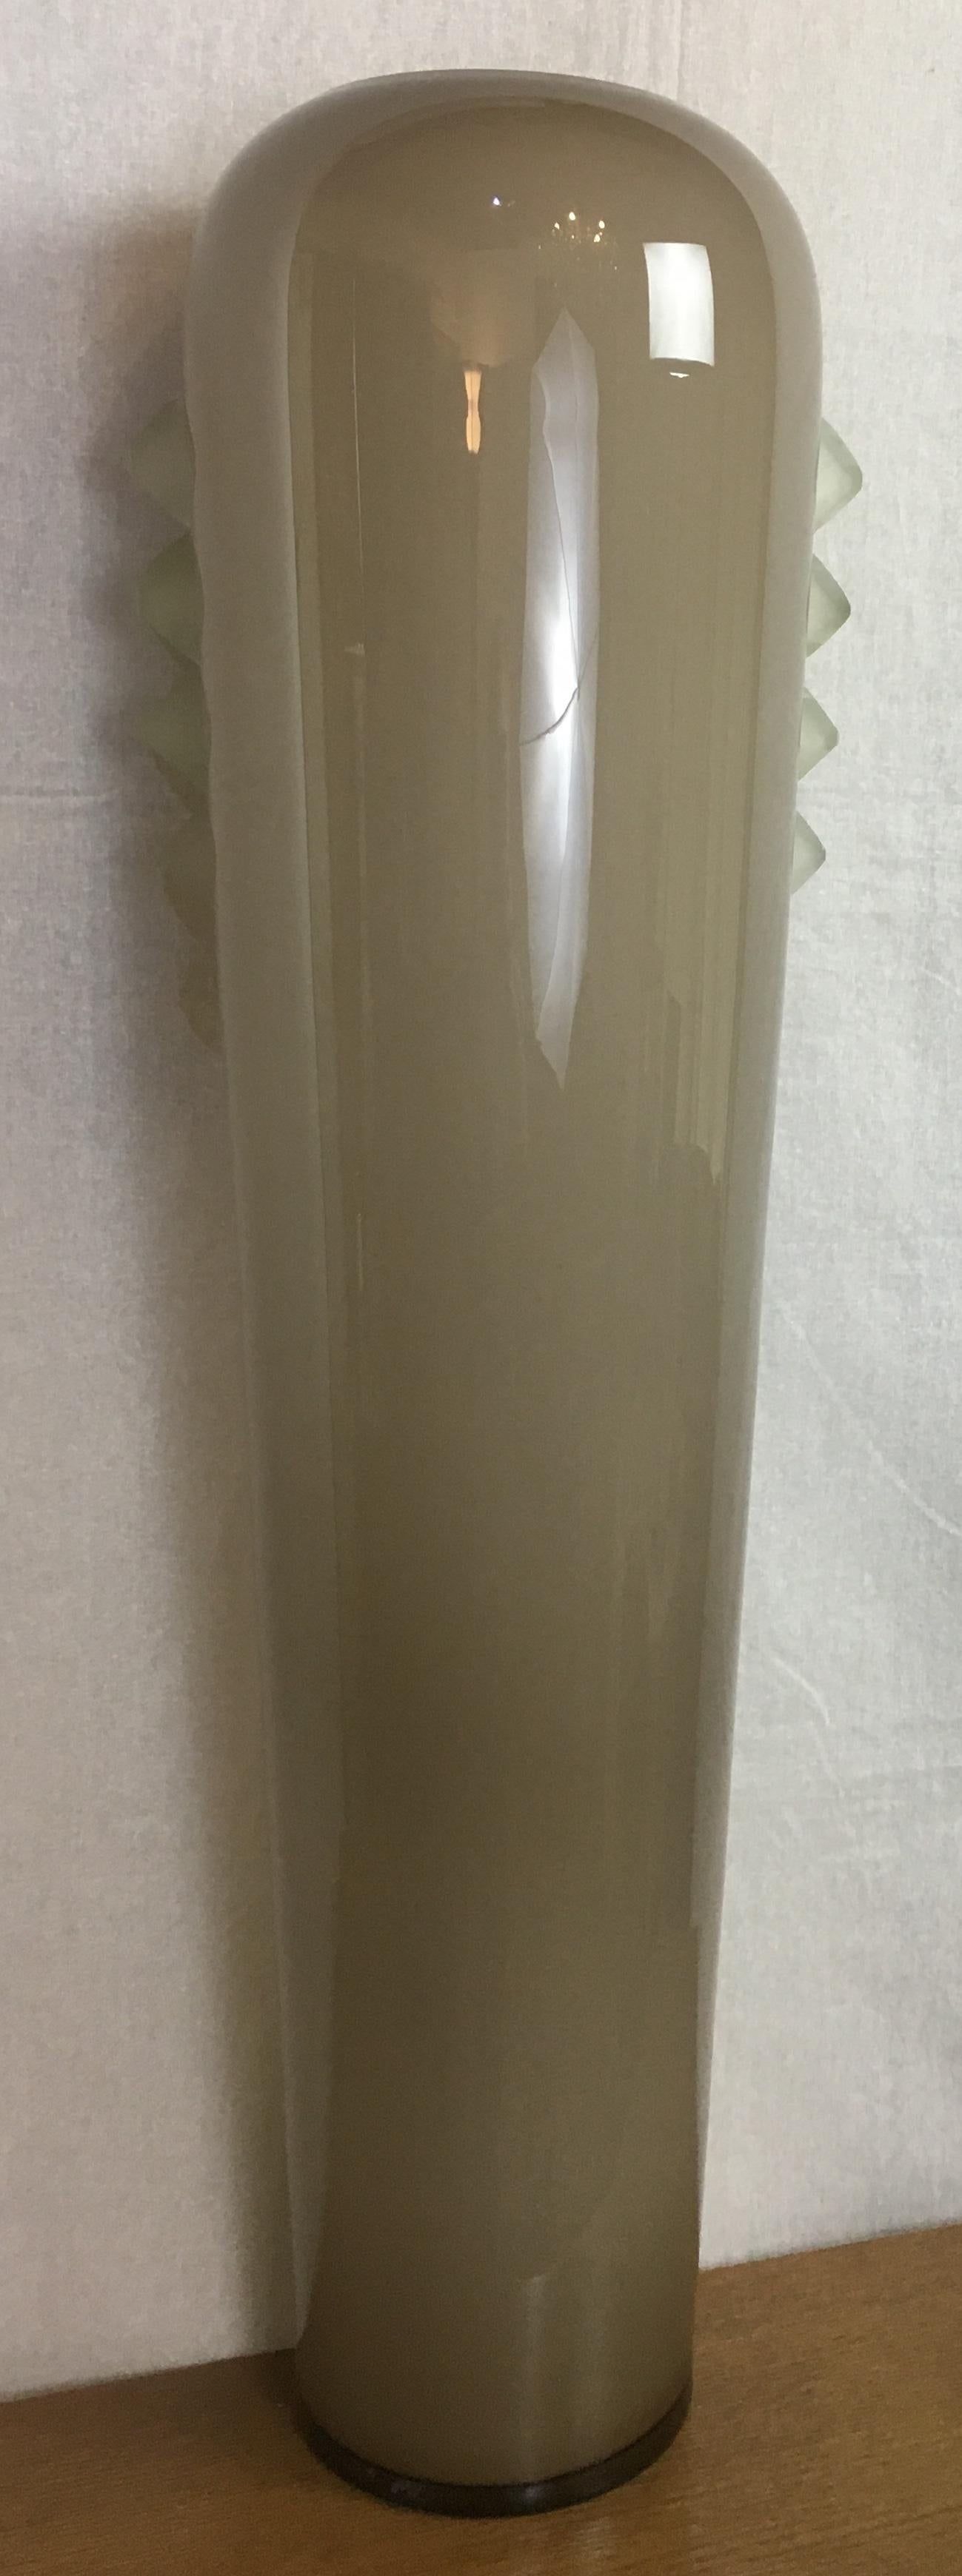 Art Deco Cubist Glass Floor Vase by Anatole Riecke, from La Coupole Brasserie For Sale 1